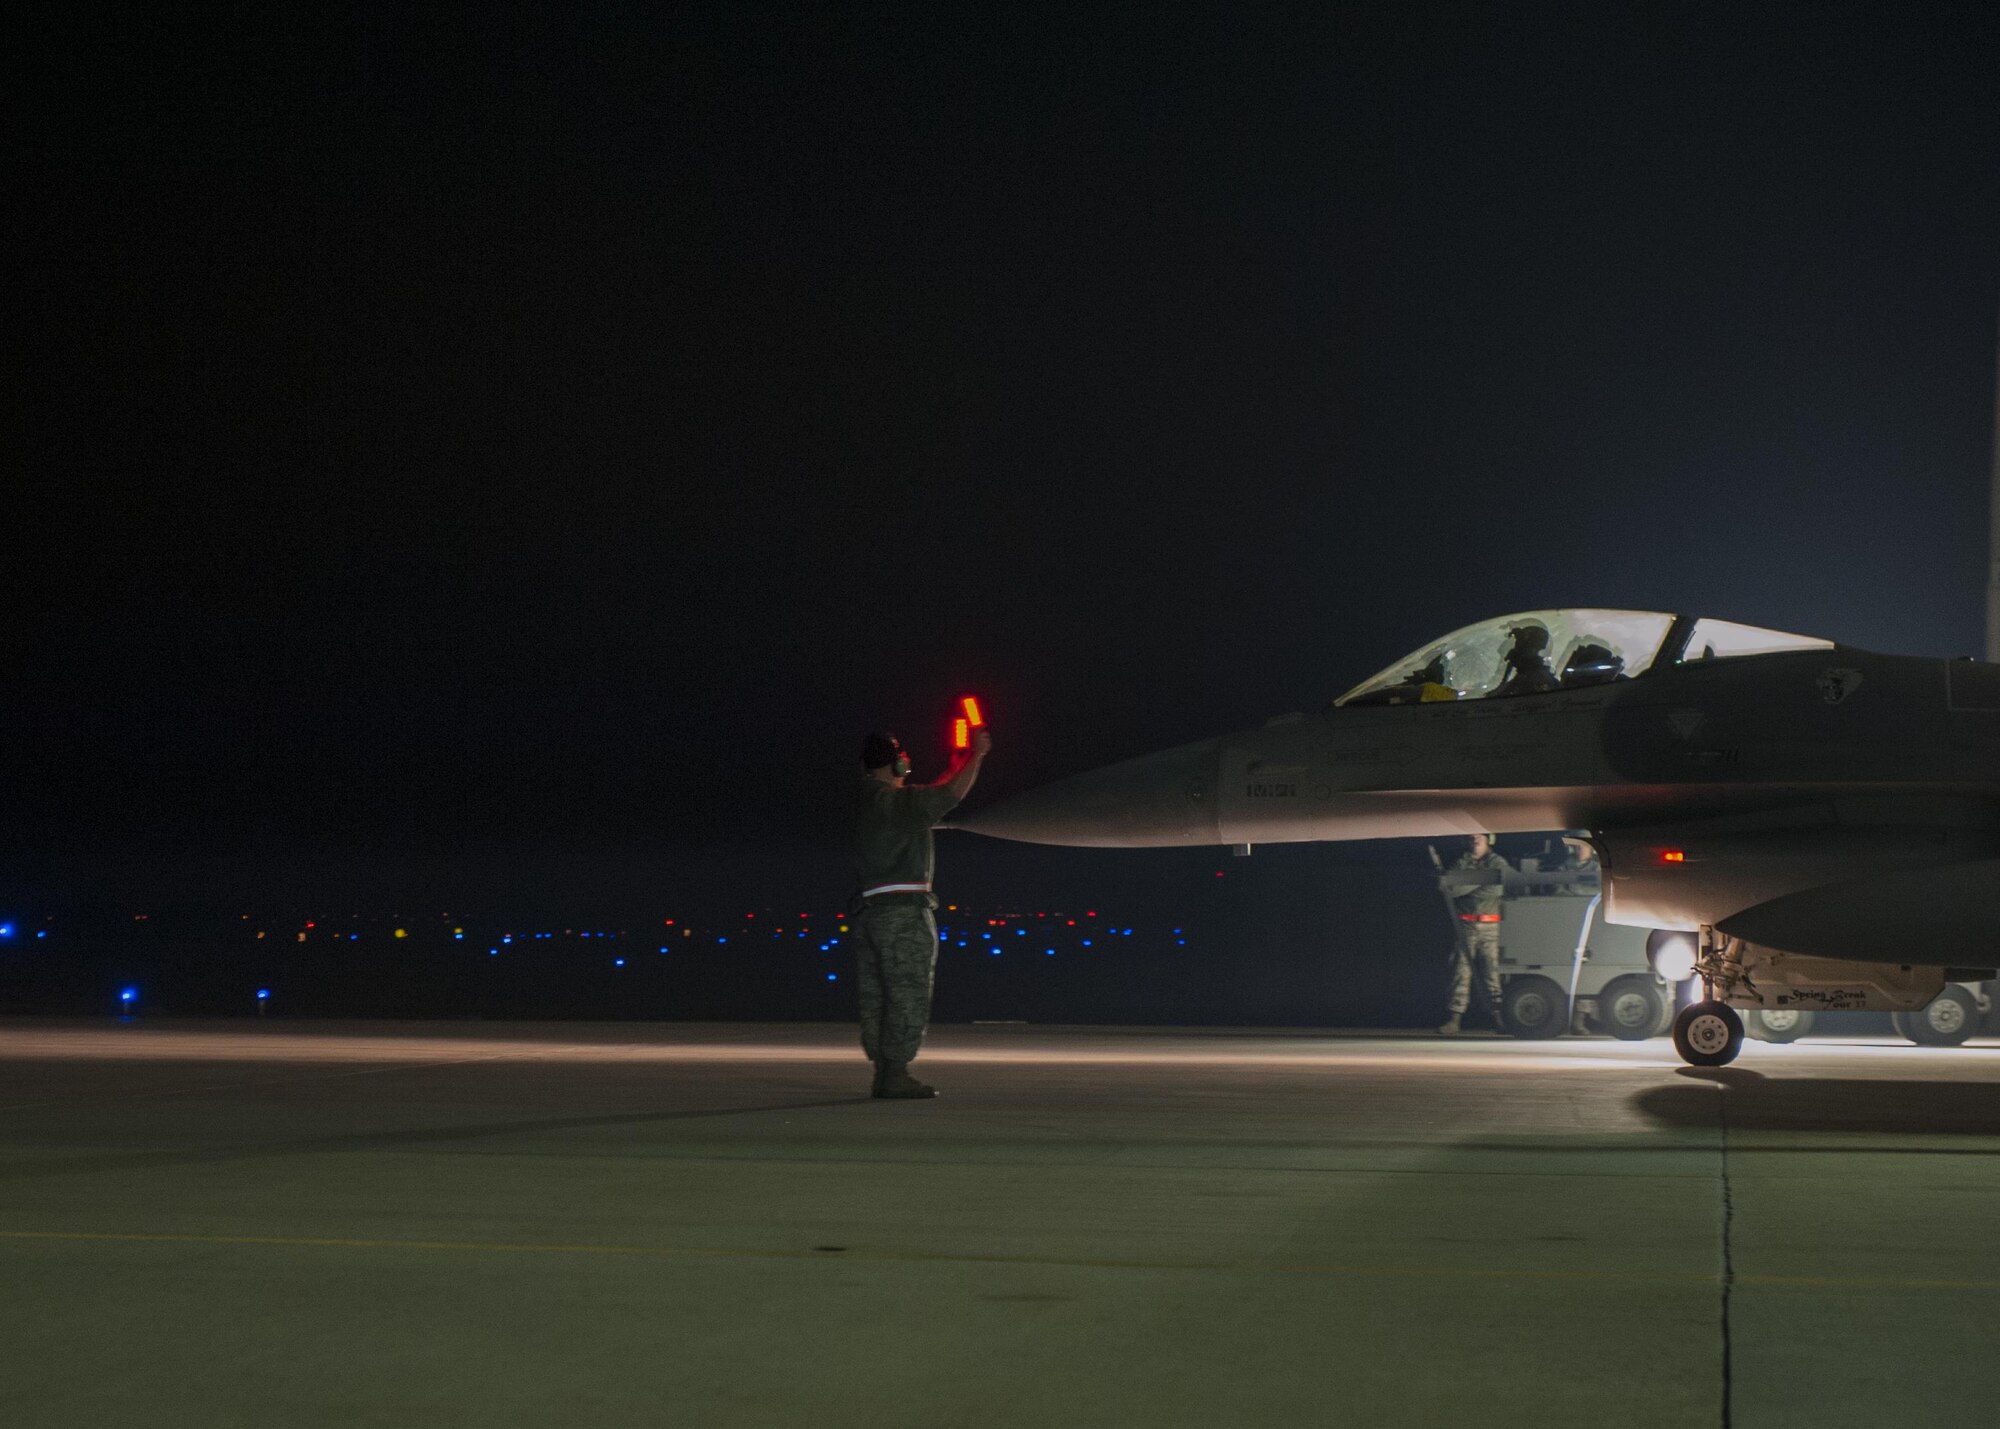 An Airman with the Wisconsin Air National Guard’s115th Fighter Wing marshals an F-16 Fighting Falcon onto the taxiway at Kunsan Air Base, Republic of Korea, Nov. 4, 2017. The aircraft departed early in the morning for their journey back to Wisconsin after a three month deployment in support of a U.S. Pacific Command Theater Security Package. (U.S. Air Force photo by Capt. Christopher Mesnard)